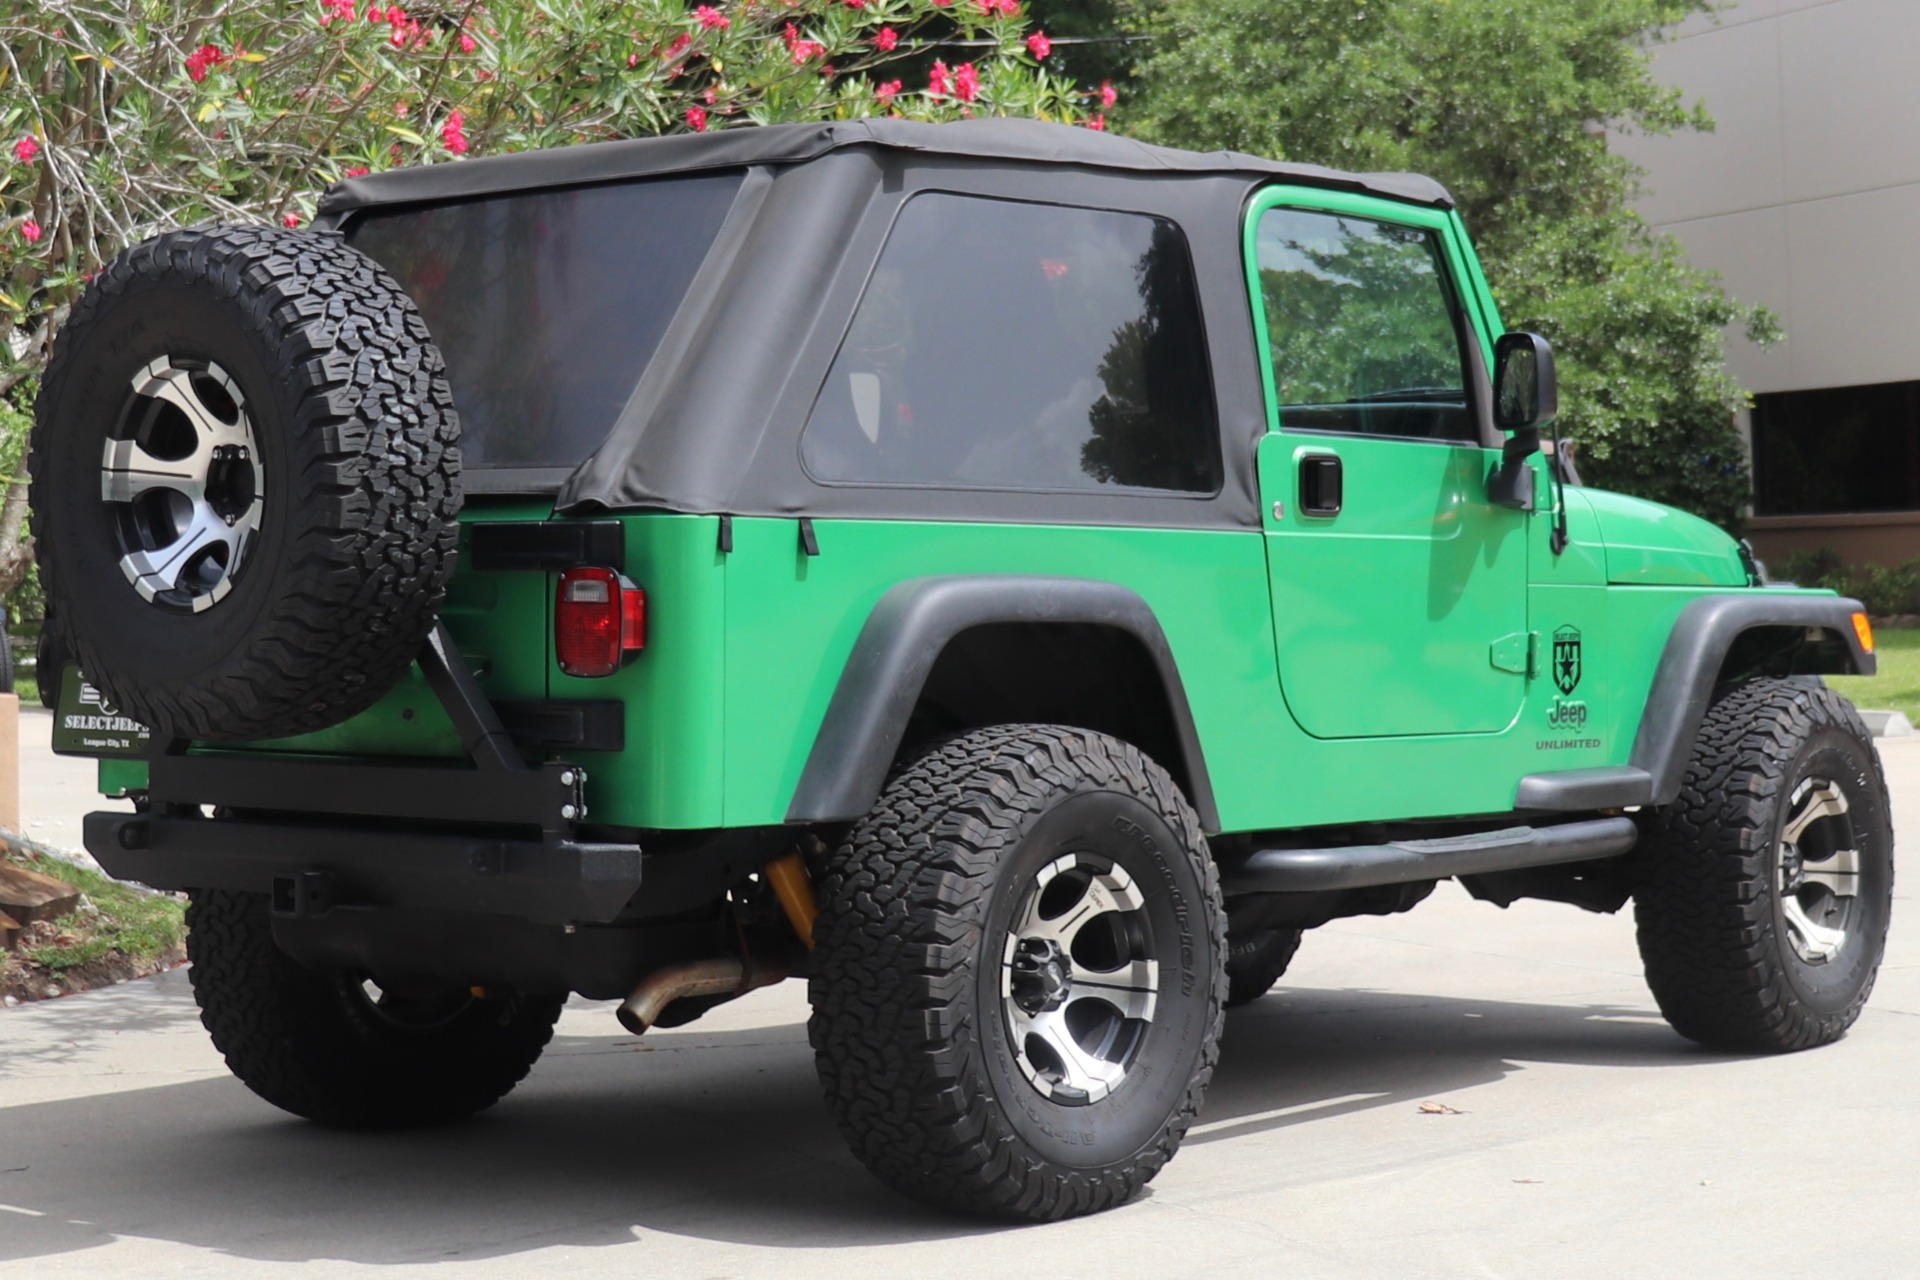 Used 2004 Jeep Wrangler Unlimited For Sale ($18,995) | Select Jeeps Inc.  Stock #792954